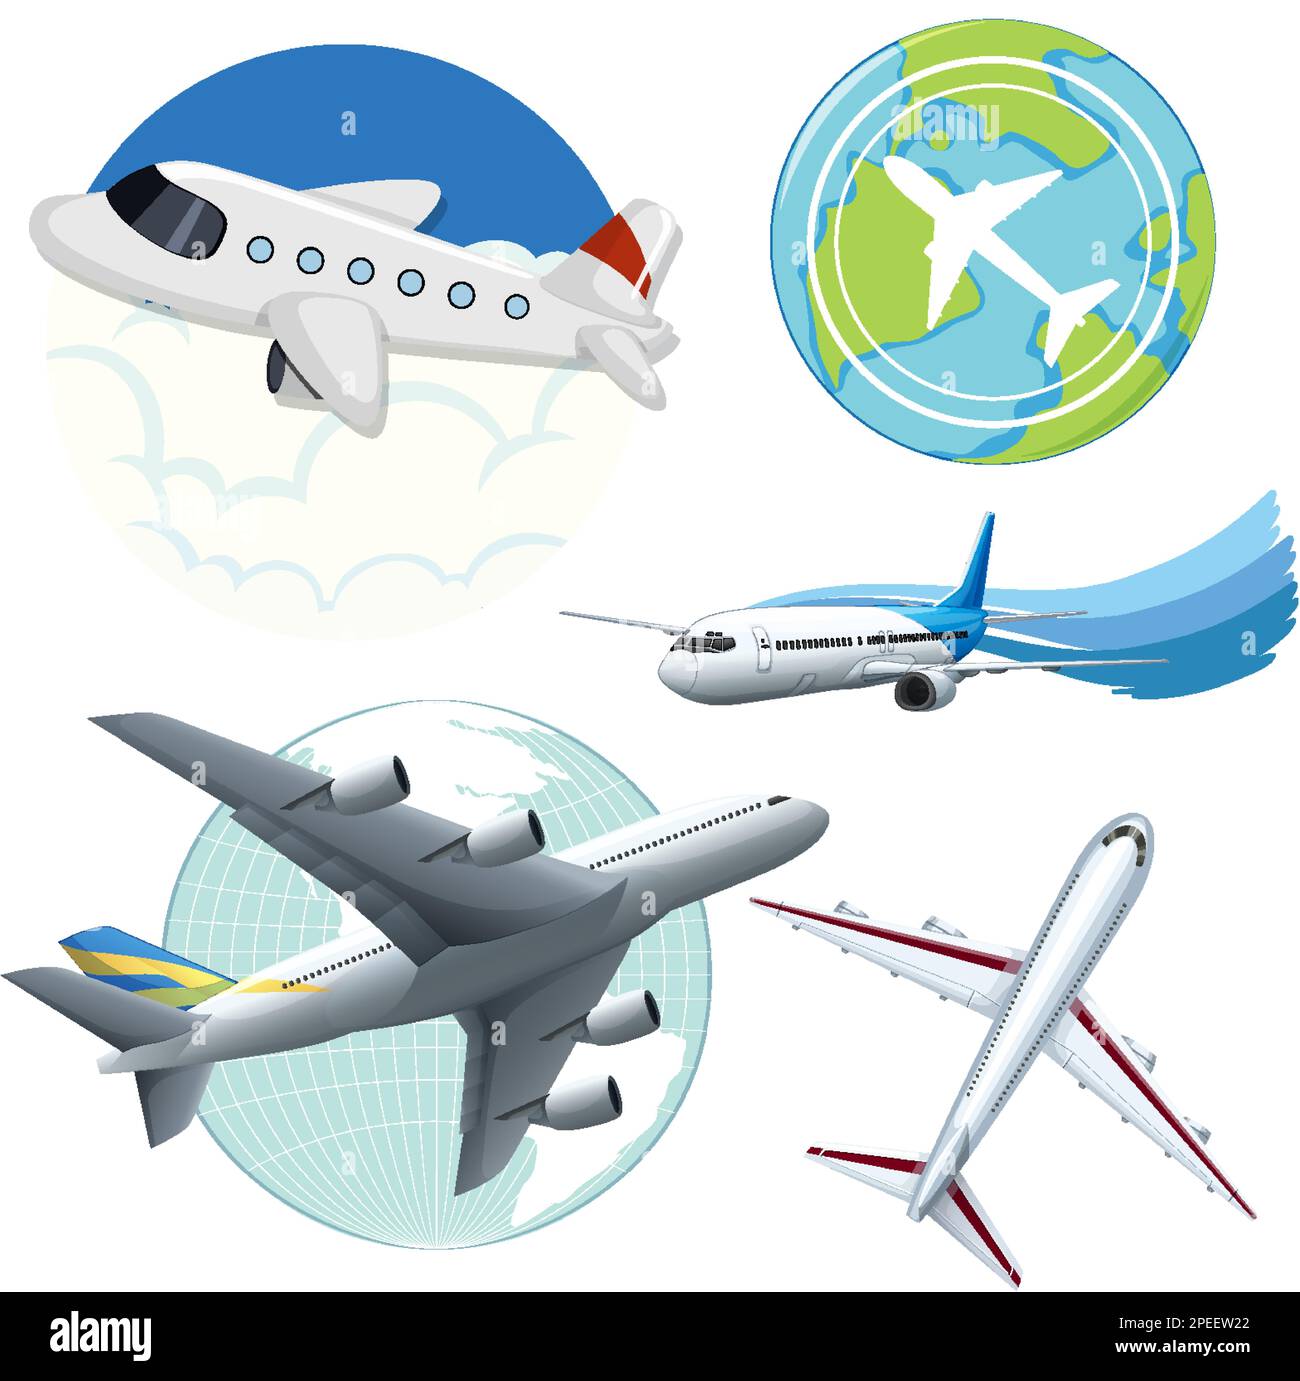 Set of different planes illustration Stock Vector